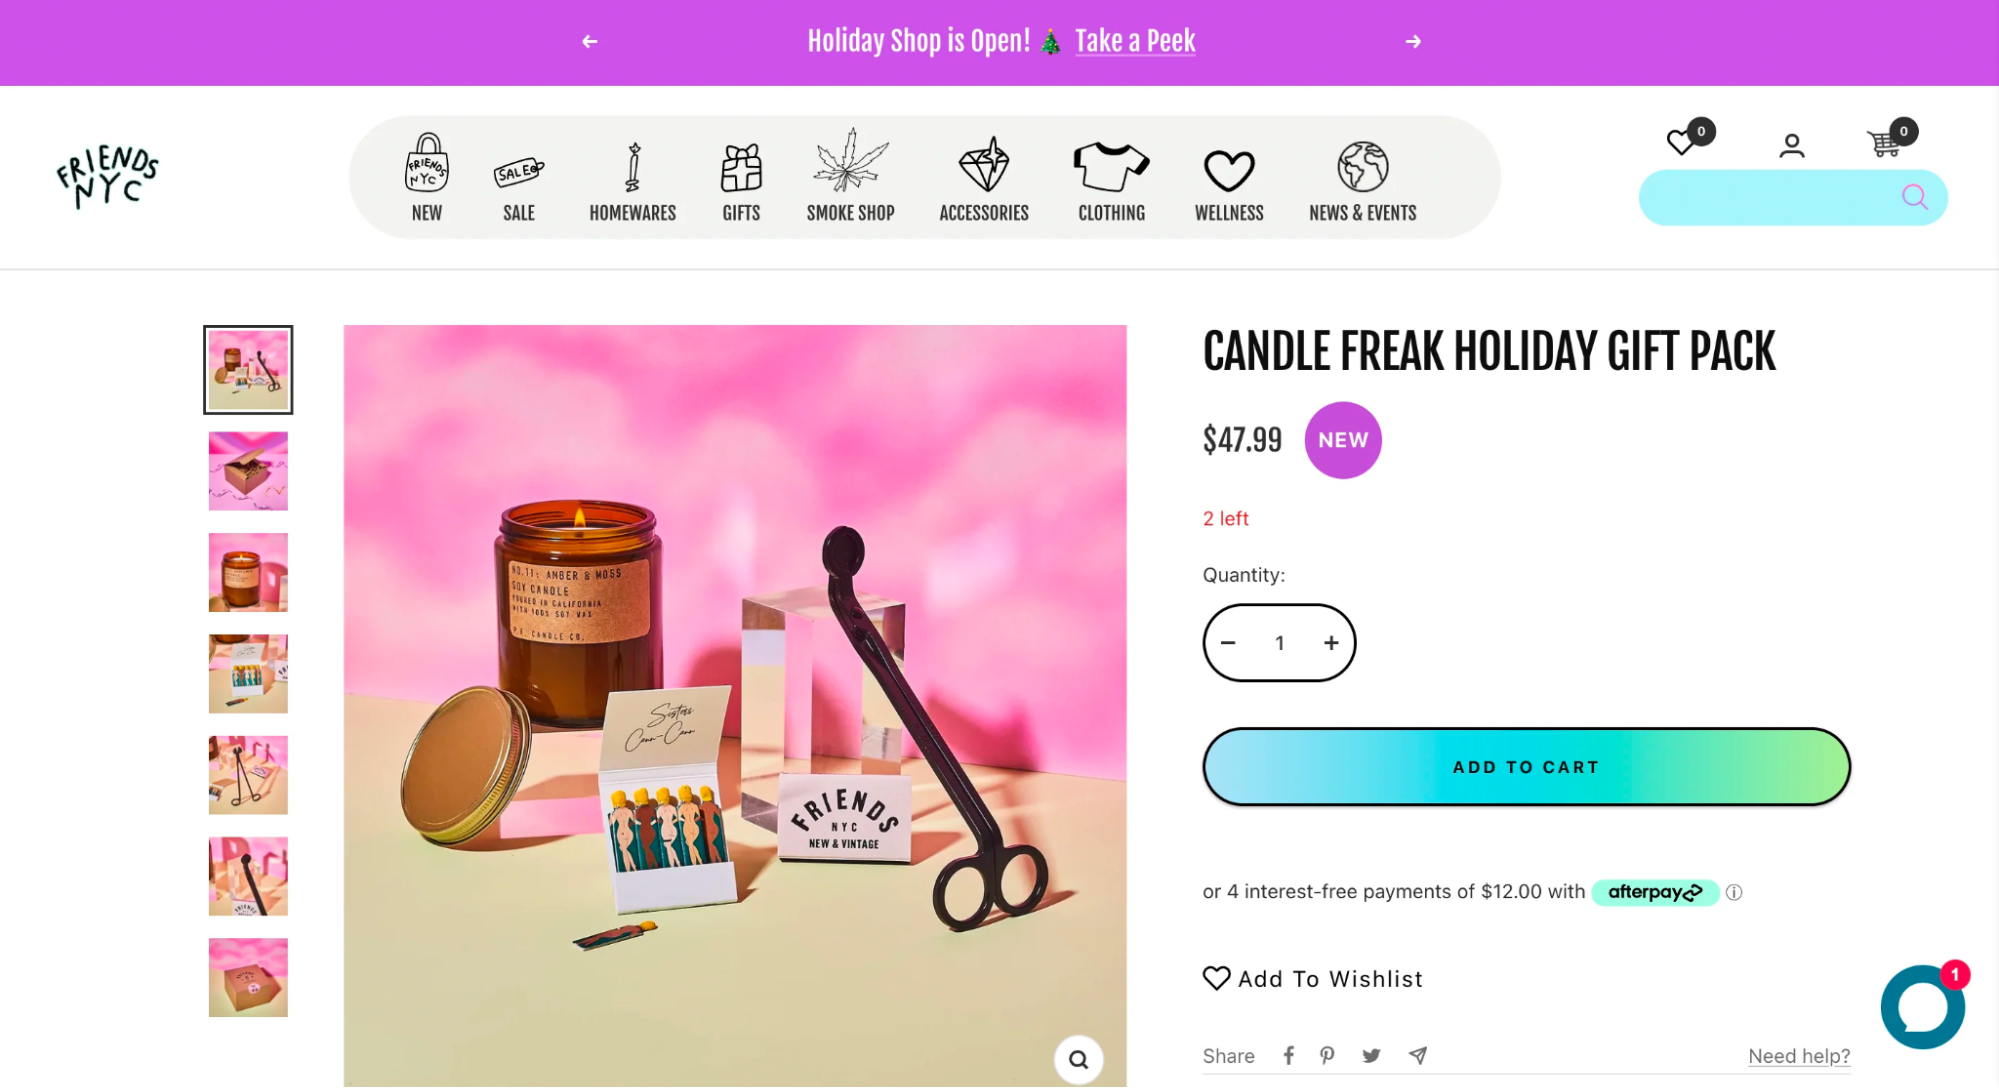 The candle freak holiday gift pack from Friends NYC